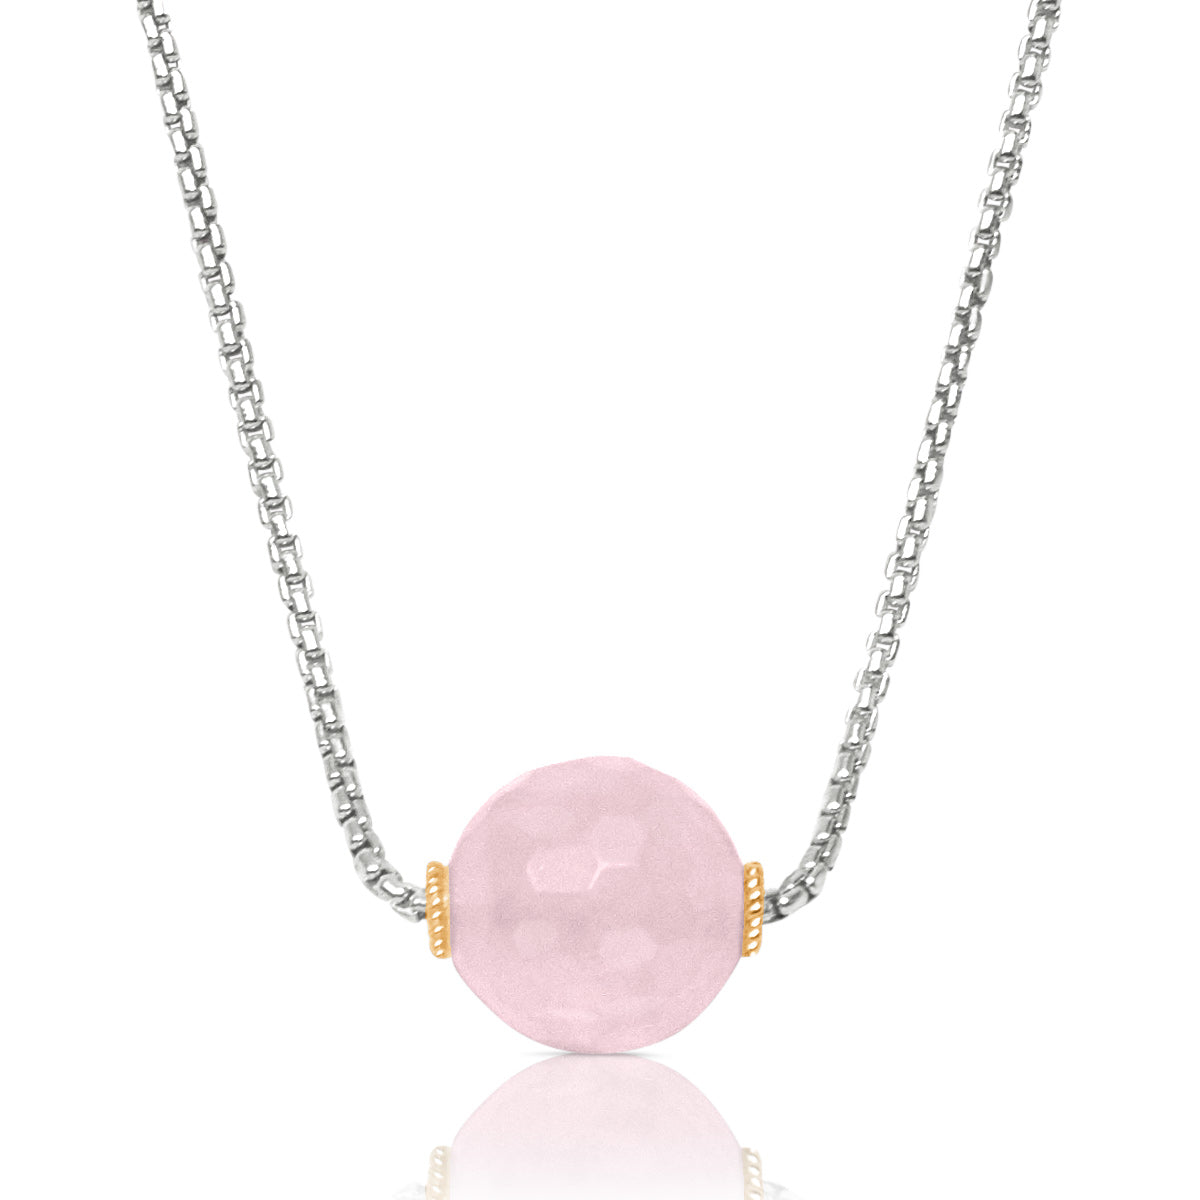 Bead Necklace with rose quartz in two tone sterling silver